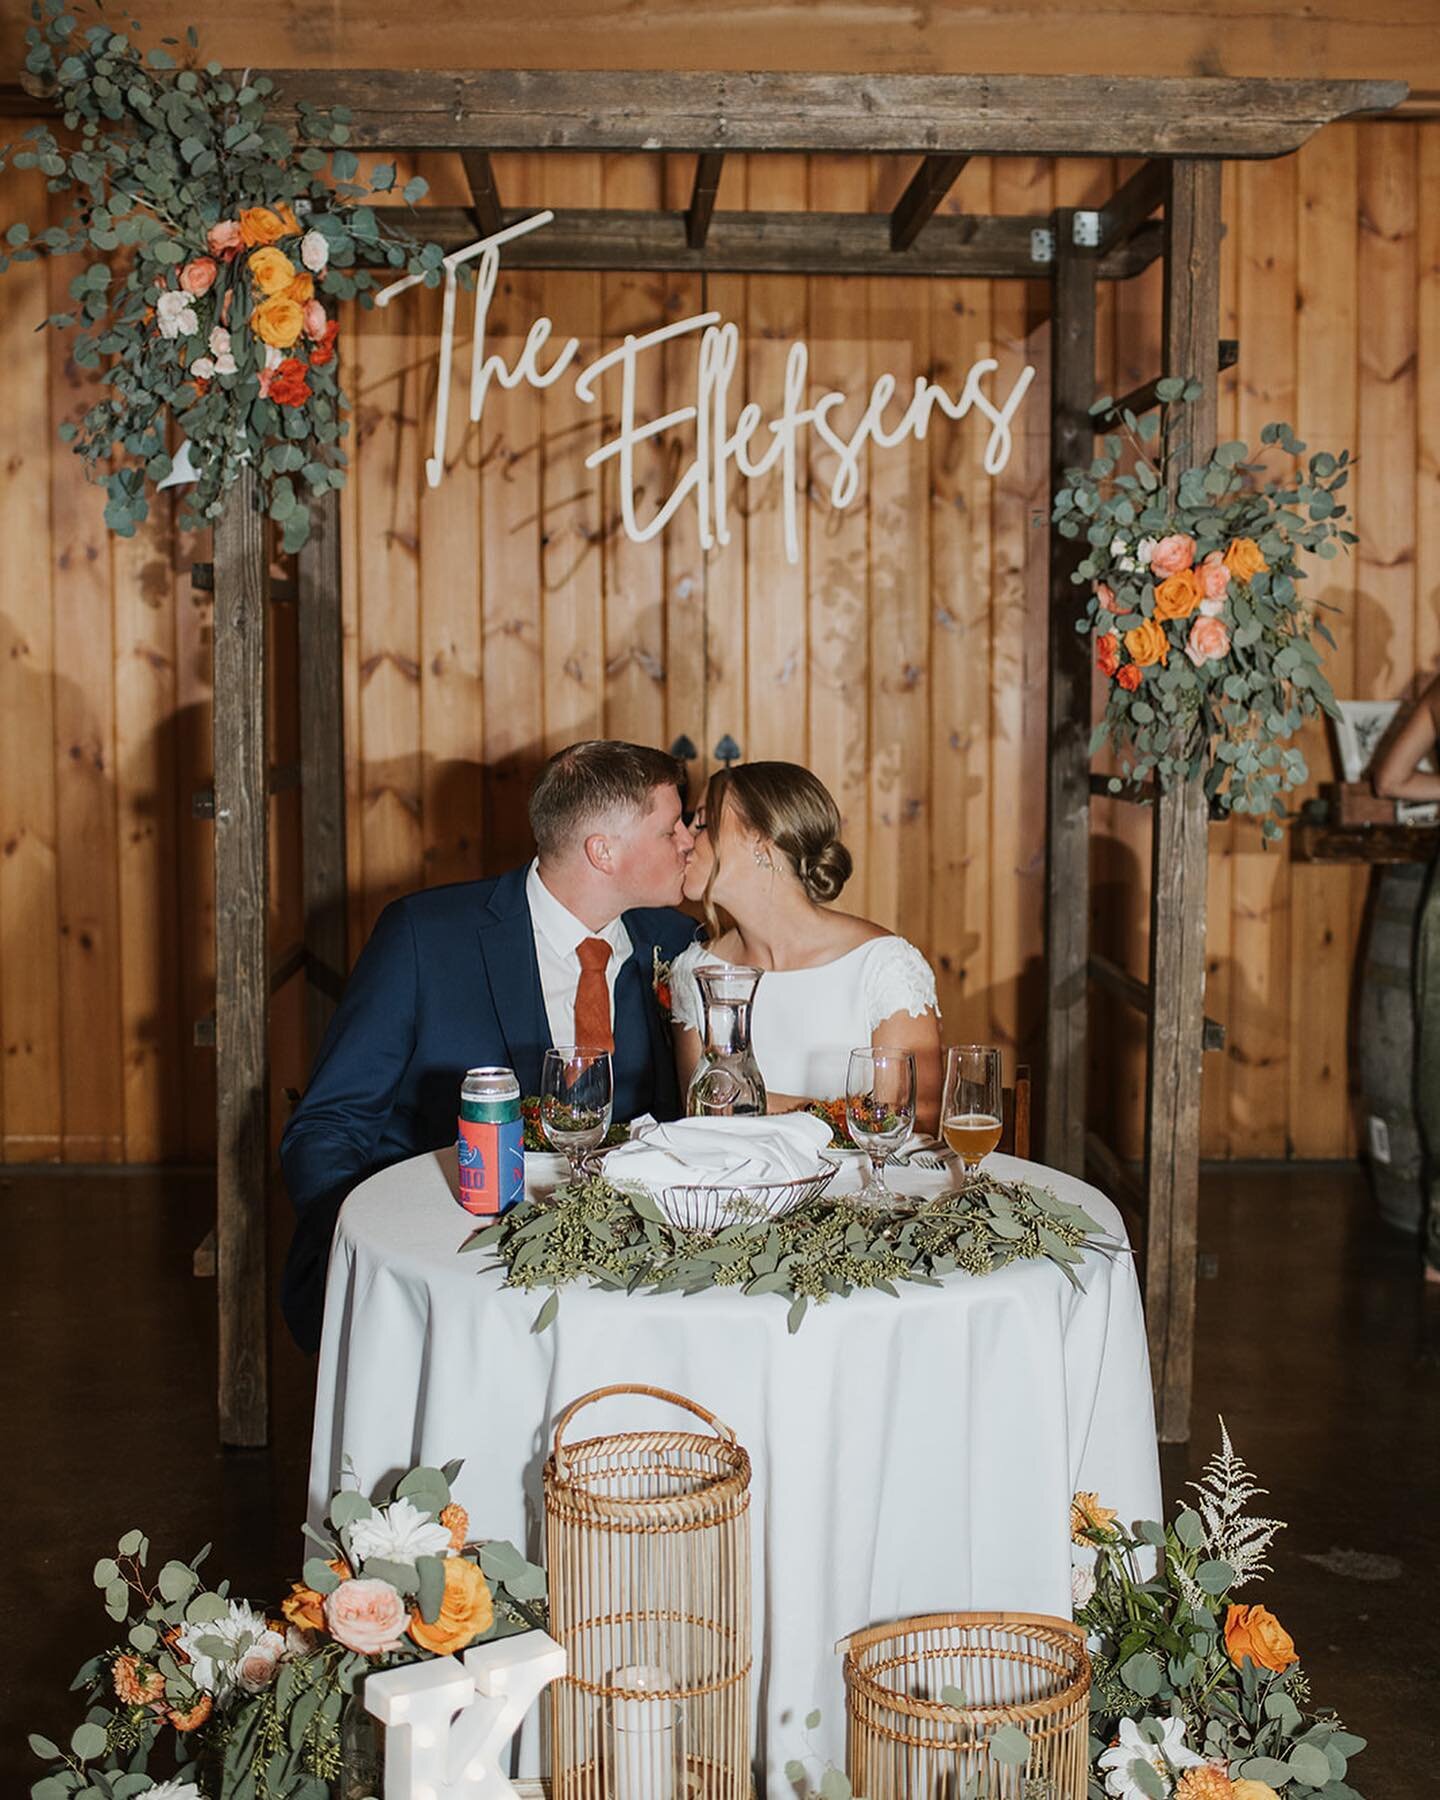 The sweetheart table 🫶🏼

📸: @alexandjullyphotography 
Venue: @indianridgepreserve 
Florals: @flowersbyapril 
Event coordinator: @a.cuomo_ 
Planner: @tayloredevents.co